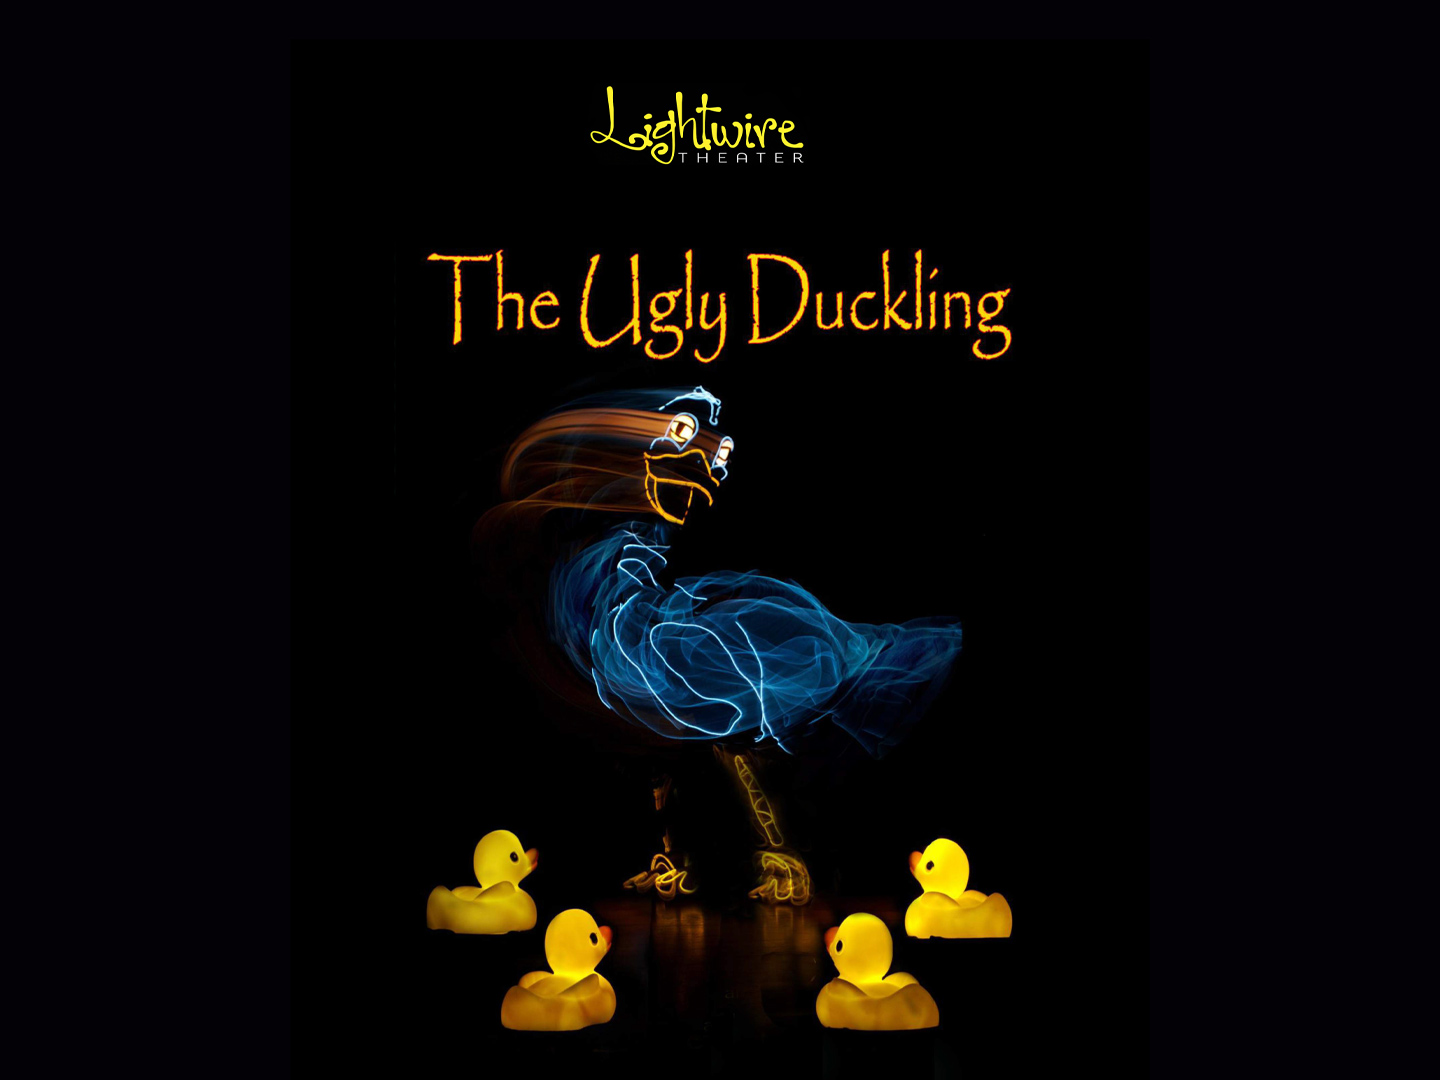 Ugly Duckling - Lightwire Theater